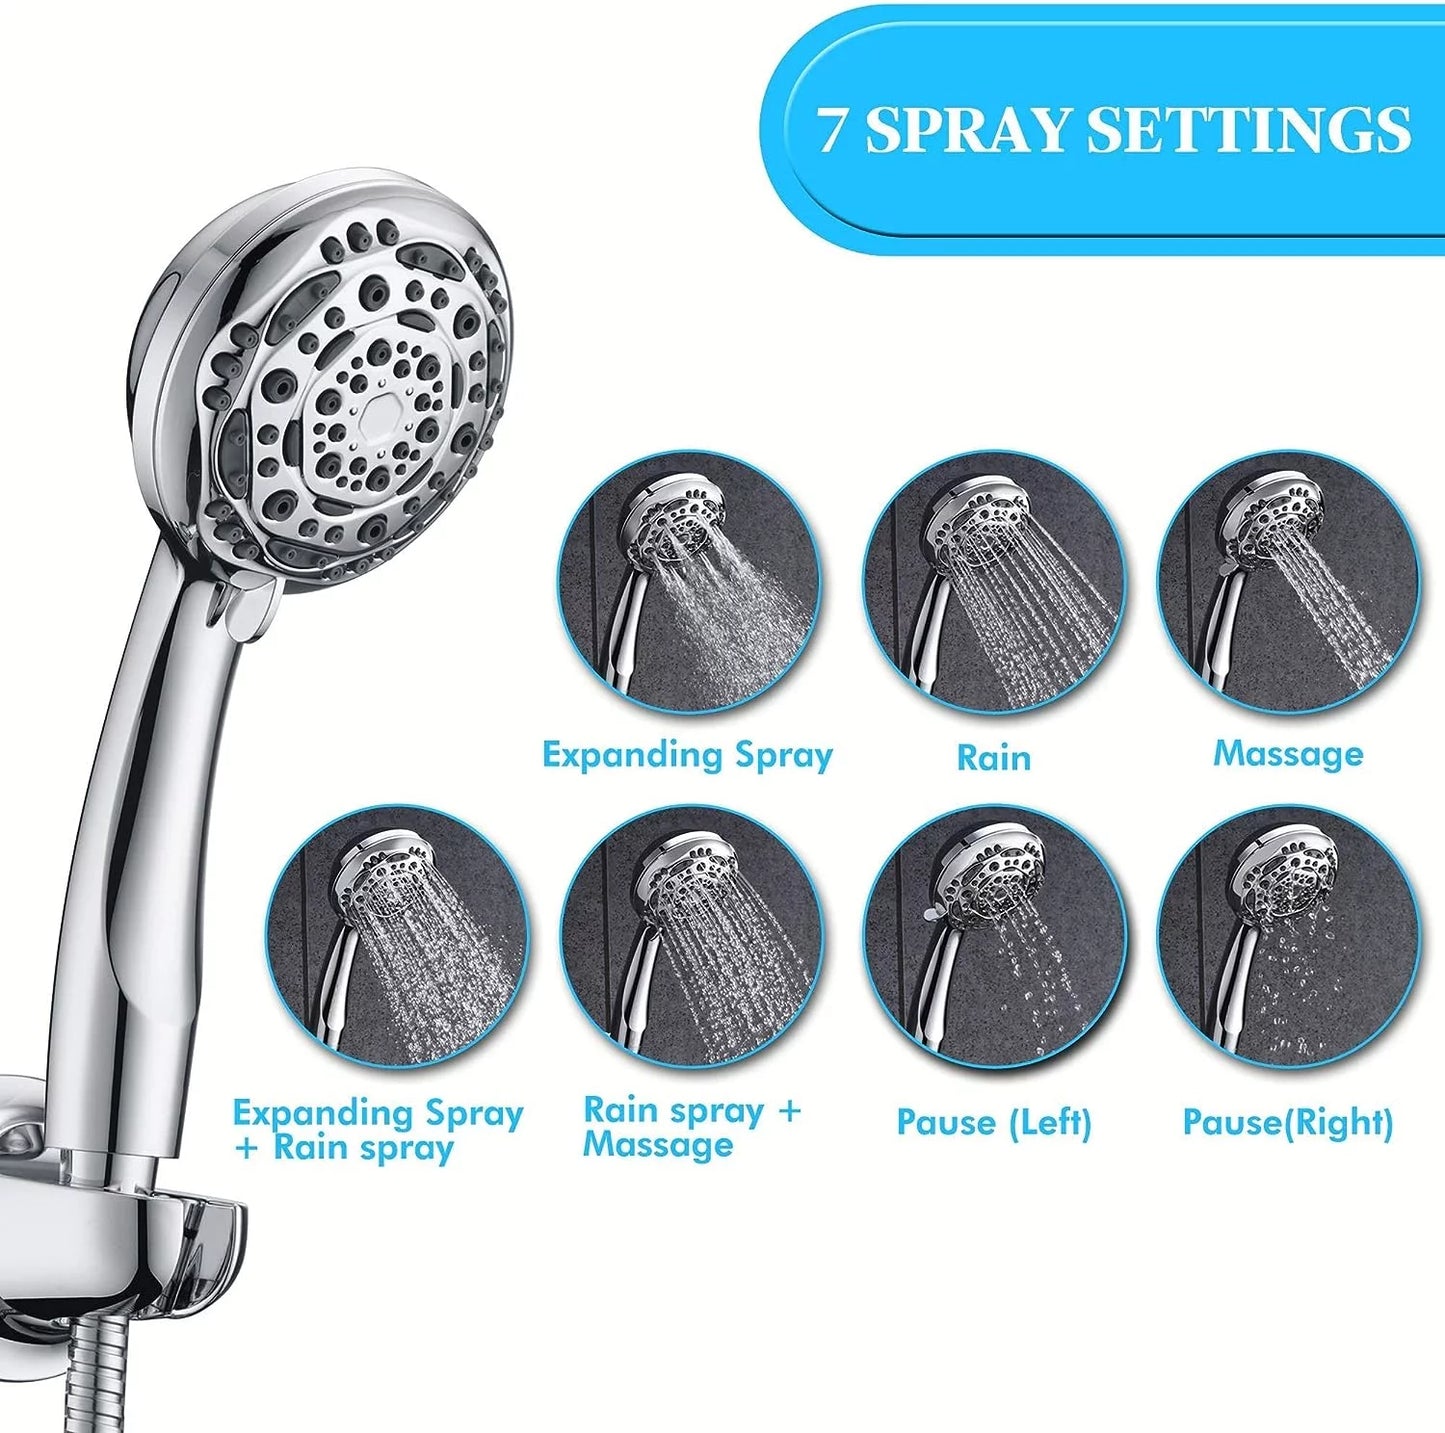 Chrome 1.8 GPM, Rain Shower Head - High Pressure Handheld Showerhead & Rain Showerhead Combo with 7 Spray Setting, 2 in 1 Shower Head System Stainless Steel Extra Long Shower Hose